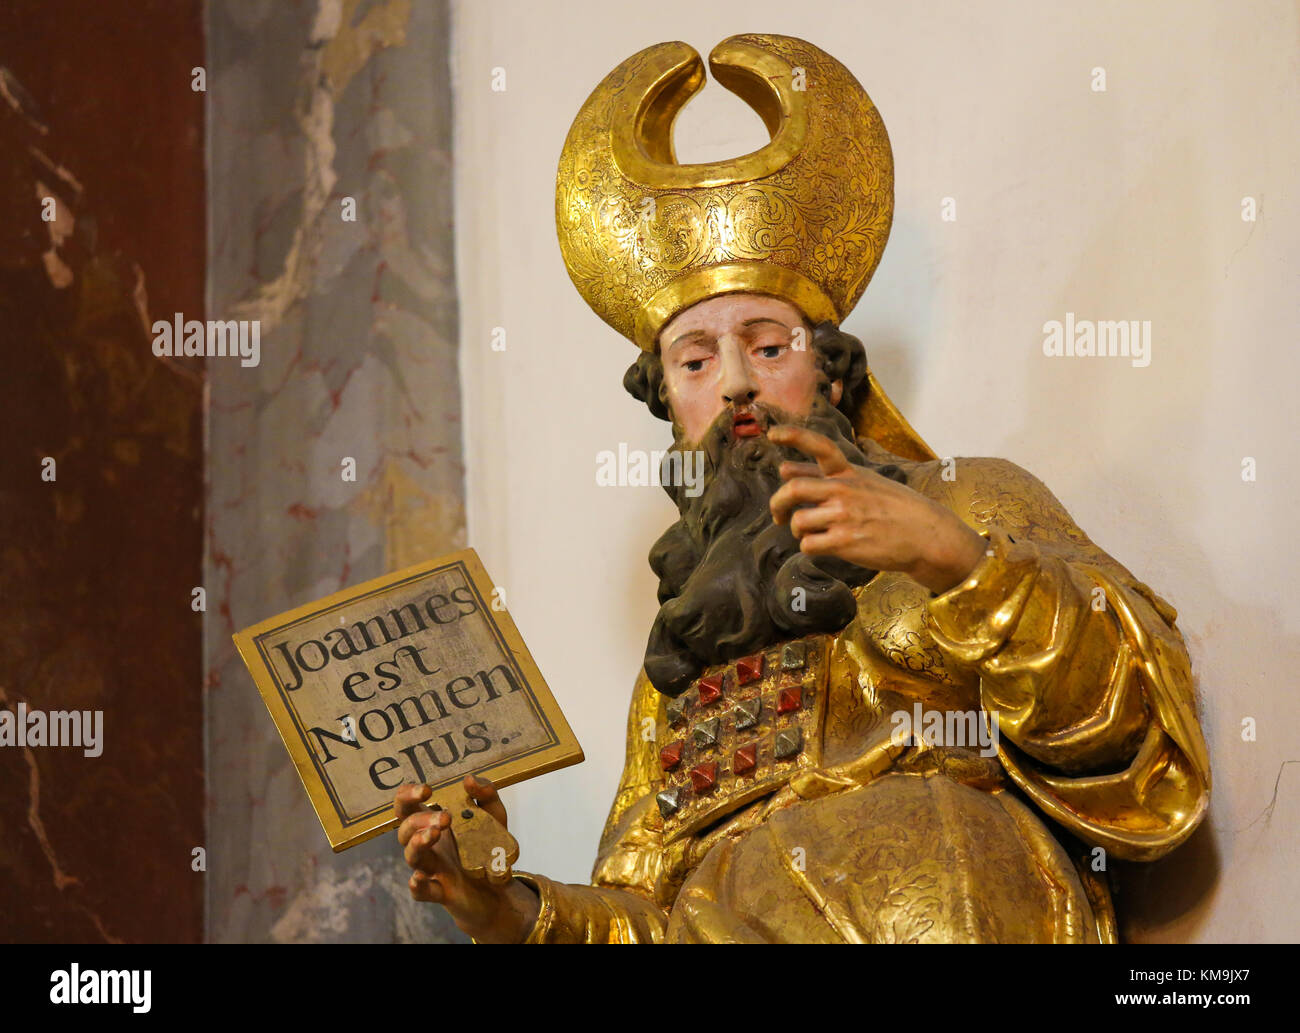 Statue of a Saint holding a sign with the Latin text Joannes est Nomen Ejus or John is his name, refering to St John the Baptist, in Loreta Church in  Stock Photo